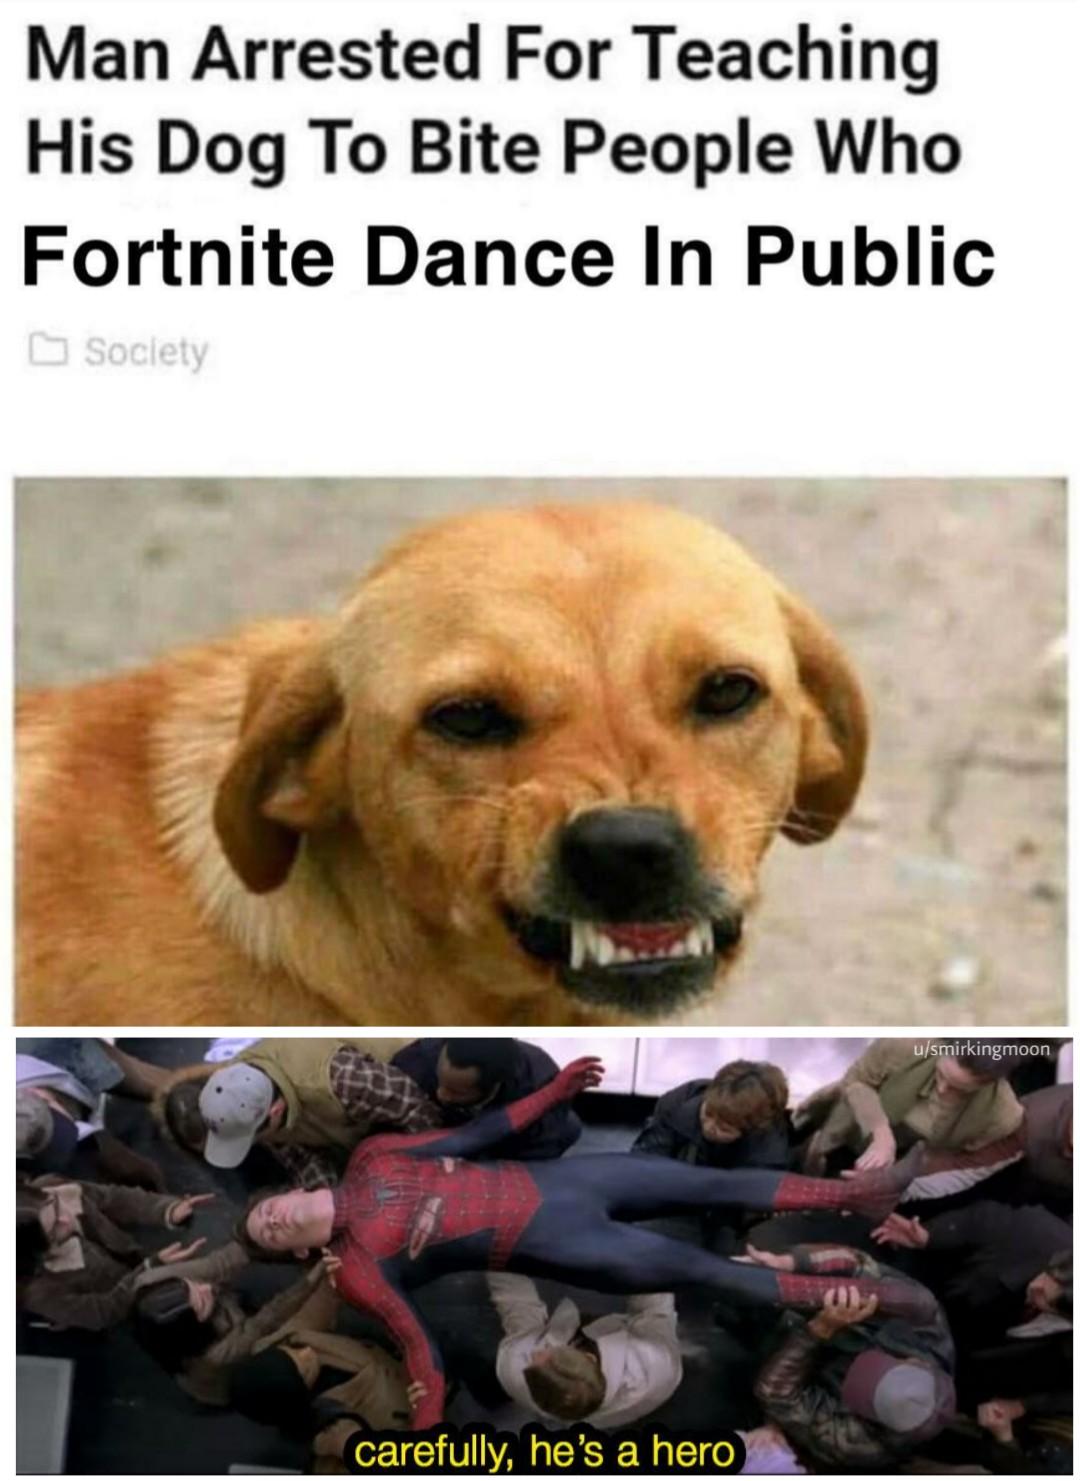 man trains dog to bite fortnite dancers - Man Arrested For Teaching His Dog To Bite People Who Fortnite Dance In Public Society usmirkingmoon carefully, he's a hero